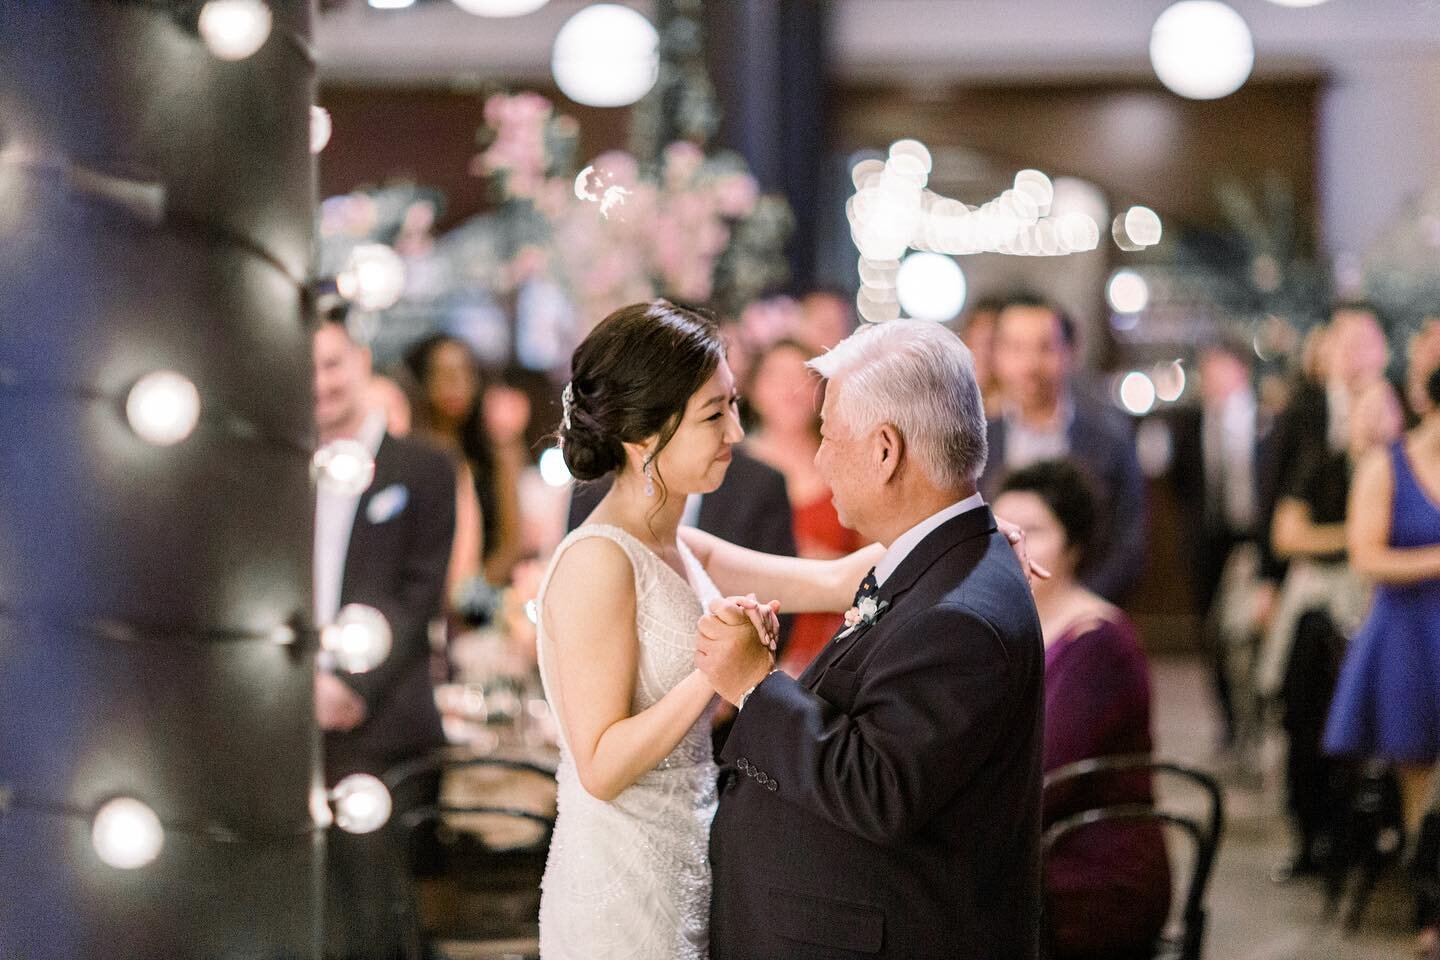 Father-daughter dances are always one of my many favorite moments at a wedding. Happy Father&rsquo;s Day to all the dads out there! 

Photography: @danayucreative &bull; Coordination: @roseahnevents &bull; Venue: @wythehotel &bull; Florist: @augustsa